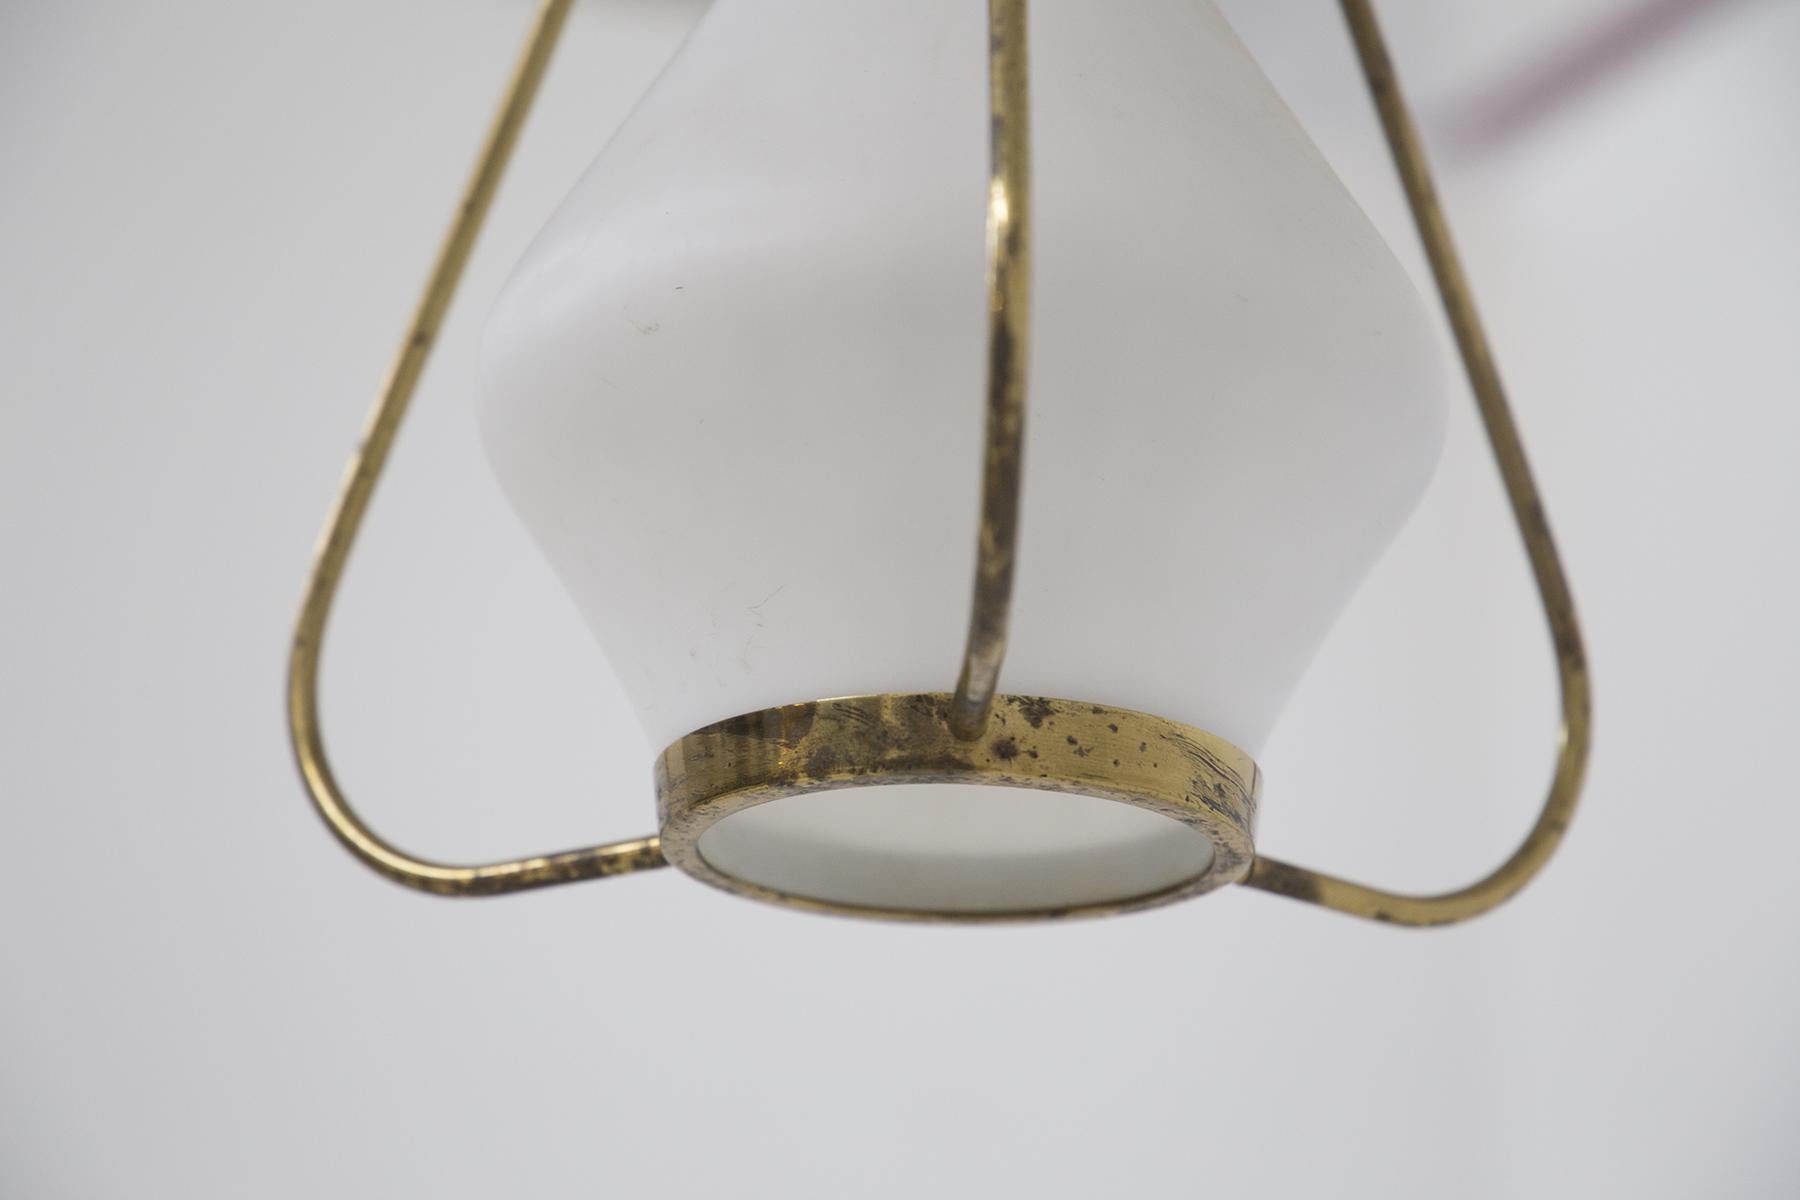 Splendid pendant of Stilnovo design made in opaline glass and brass, in the 1960s. The chandelier connects to the ceiling with a semicircular black aluminum element; the stem is made in the form of a gold-plated brass chain, which attaches to the